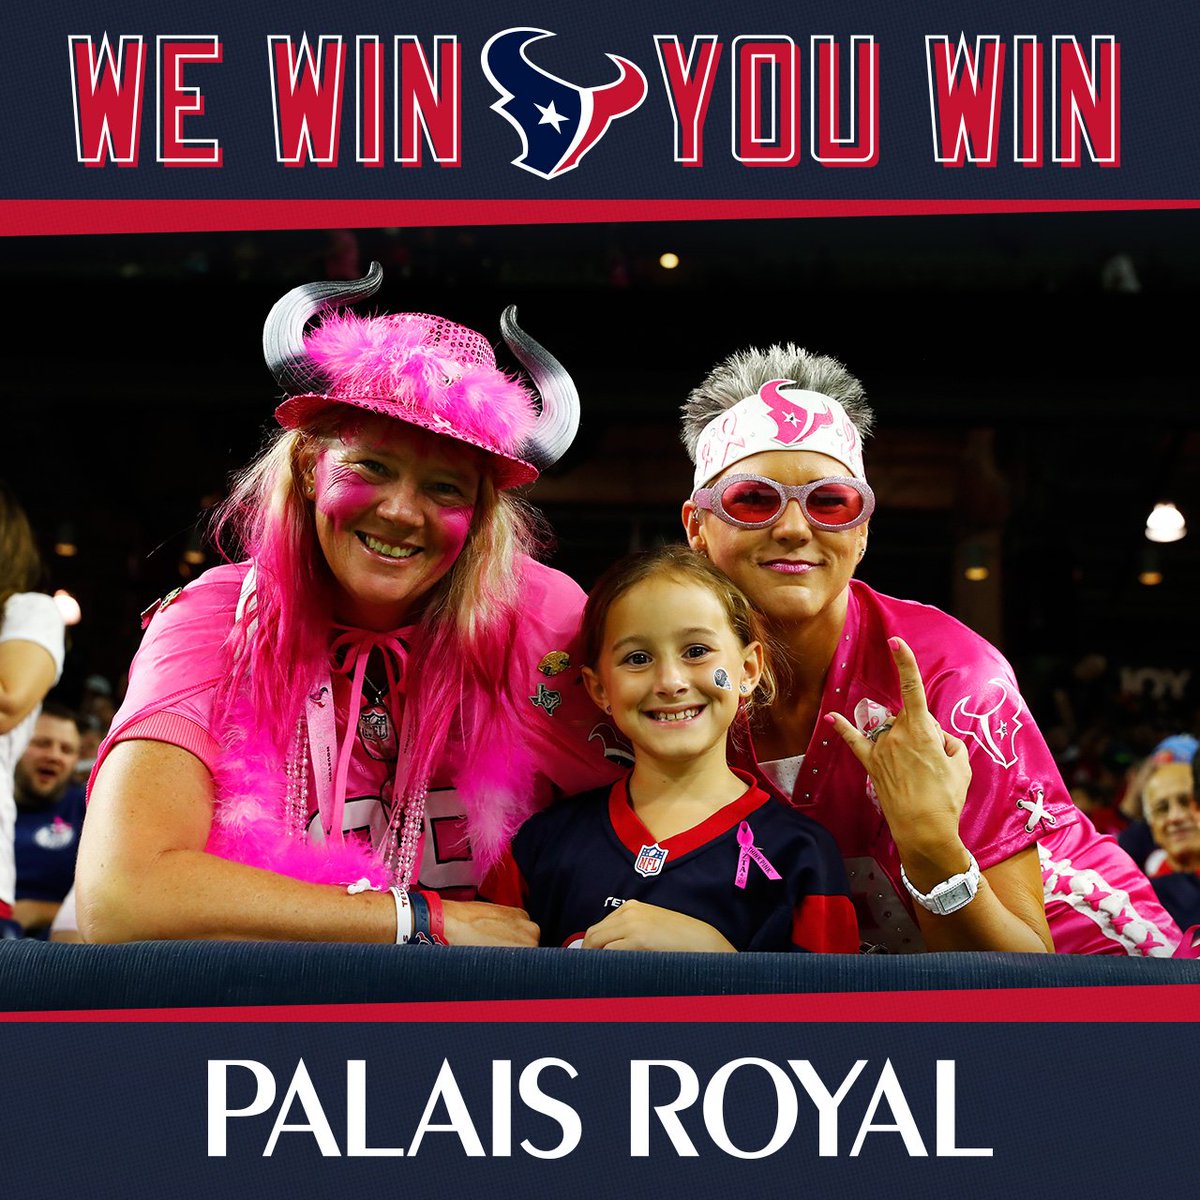 Stop by any Houston-area @ShopPalaisRoyal and say "Go #Texans" to get 40% off a single item! https://t.co/ibAcRzHKr8